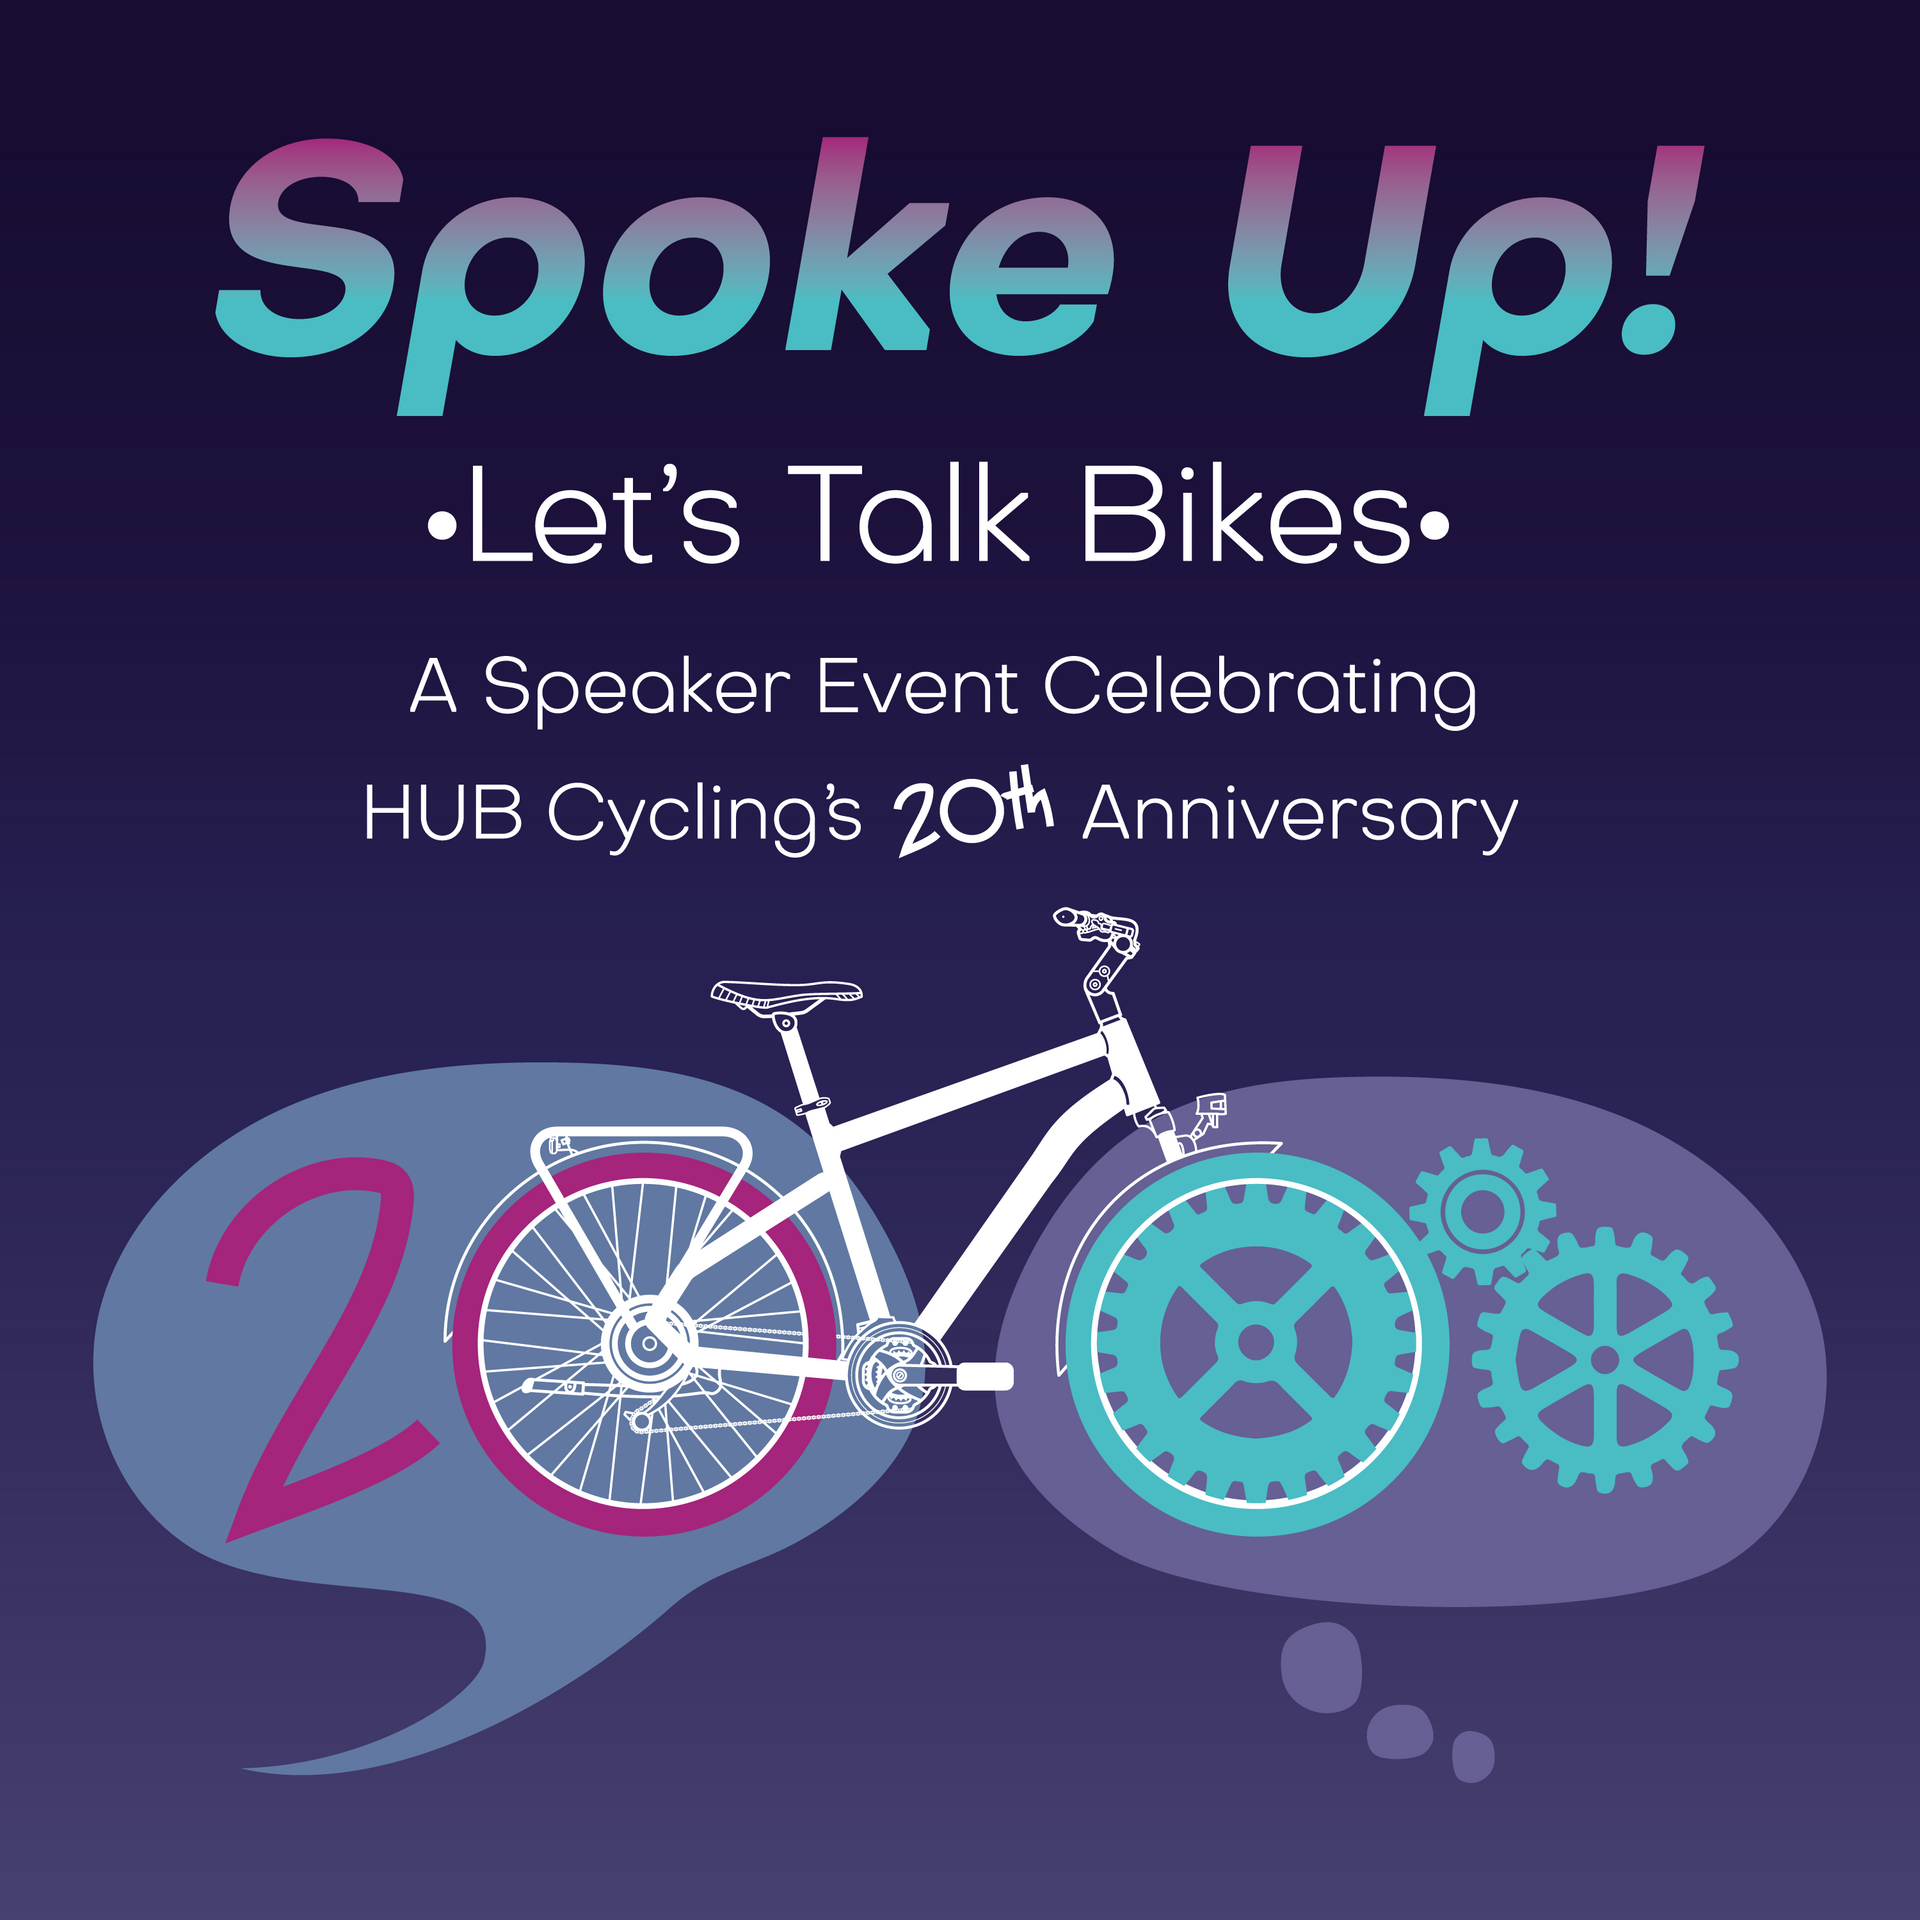 Spoke Up! Event Poster Design for Hub Cycling